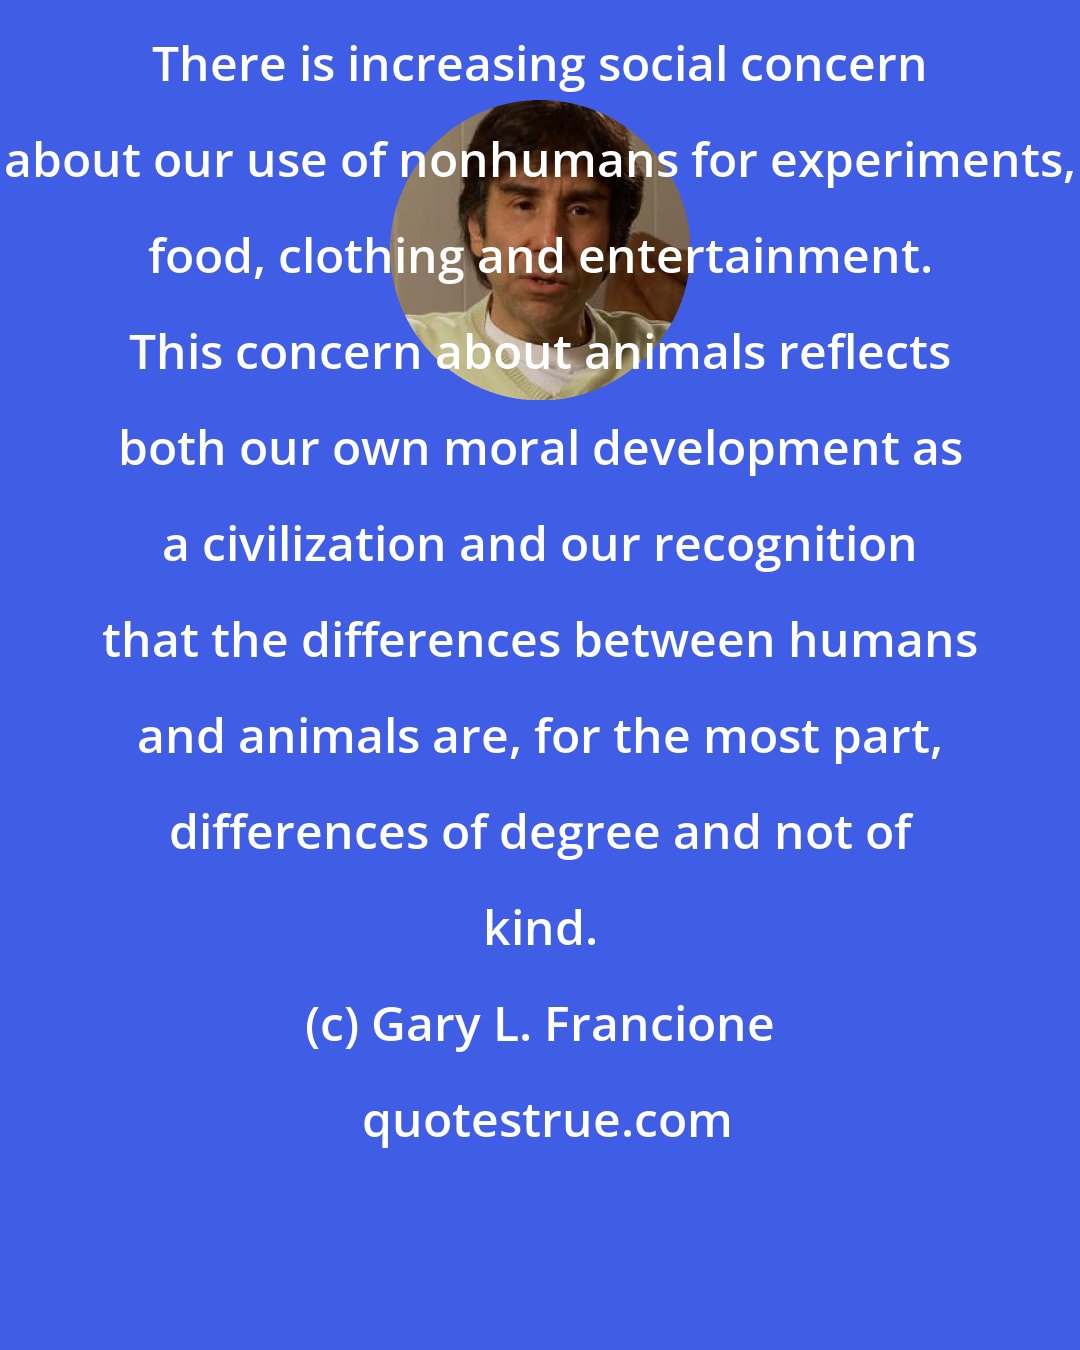 Gary L. Francione: There is increasing social concern about our use of nonhumans for experiments, food, clothing and entertainment. This concern about animals reflects both our own moral development as a civilization and our recognition that the differences between humans and animals are, for the most part, differences of degree and not of kind.